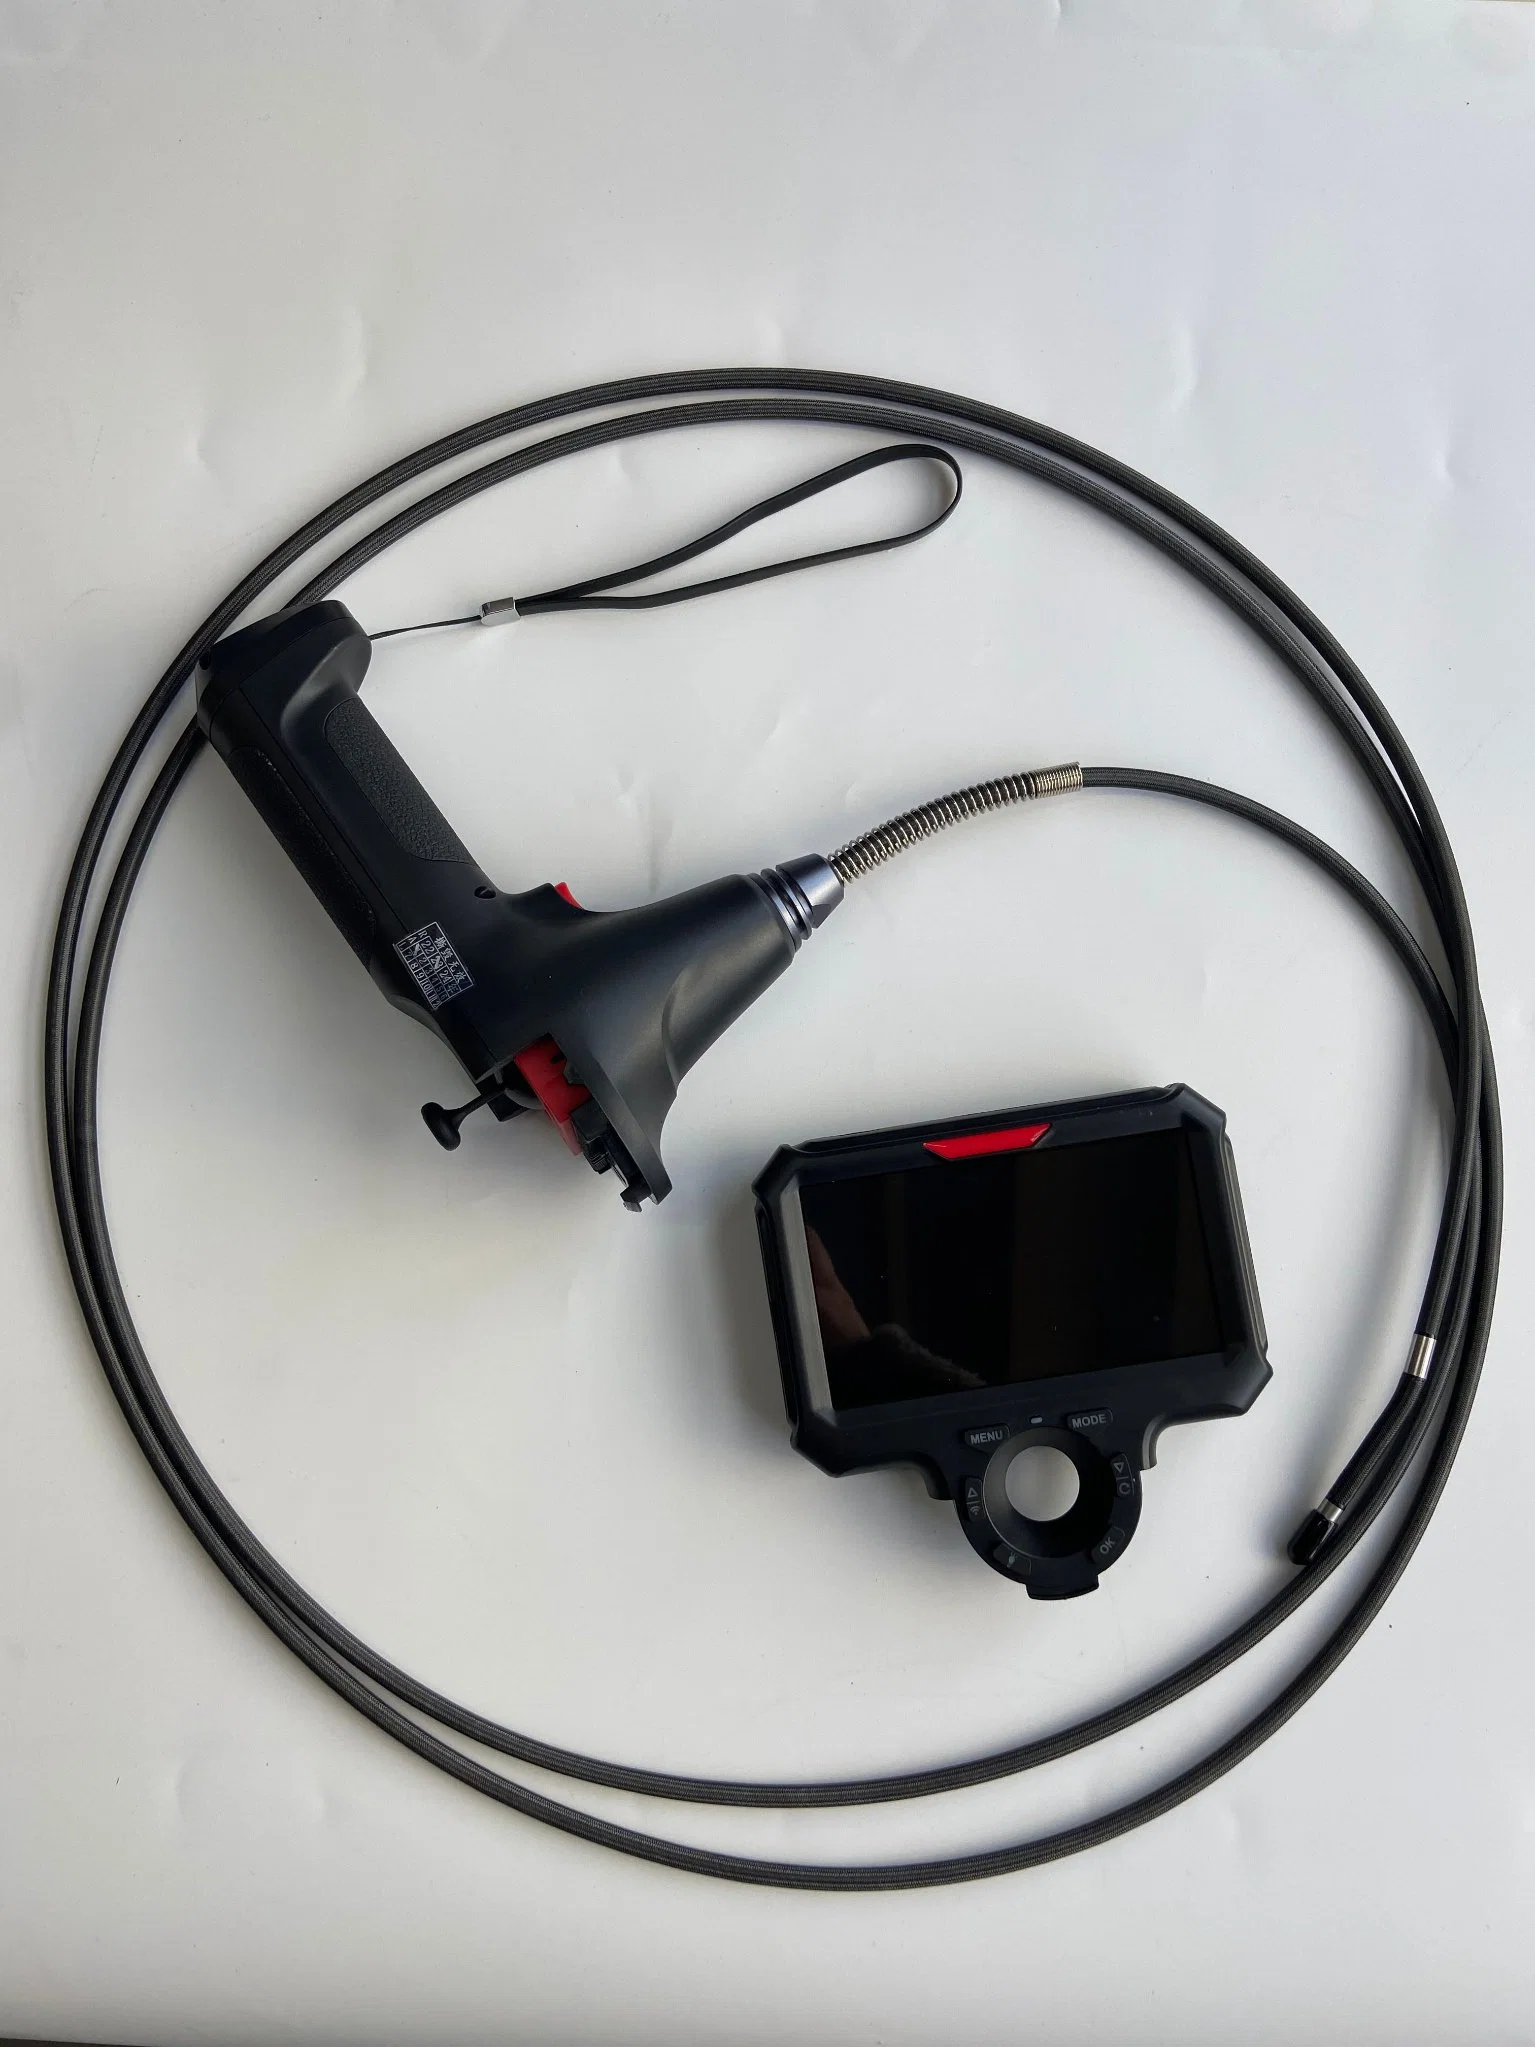 Industrial Borescope Inspection Camera with 3.9mm Probe Lens, 360 Degree Joystick Articulation, , 2mts Testing Cable, 5 Inch Display